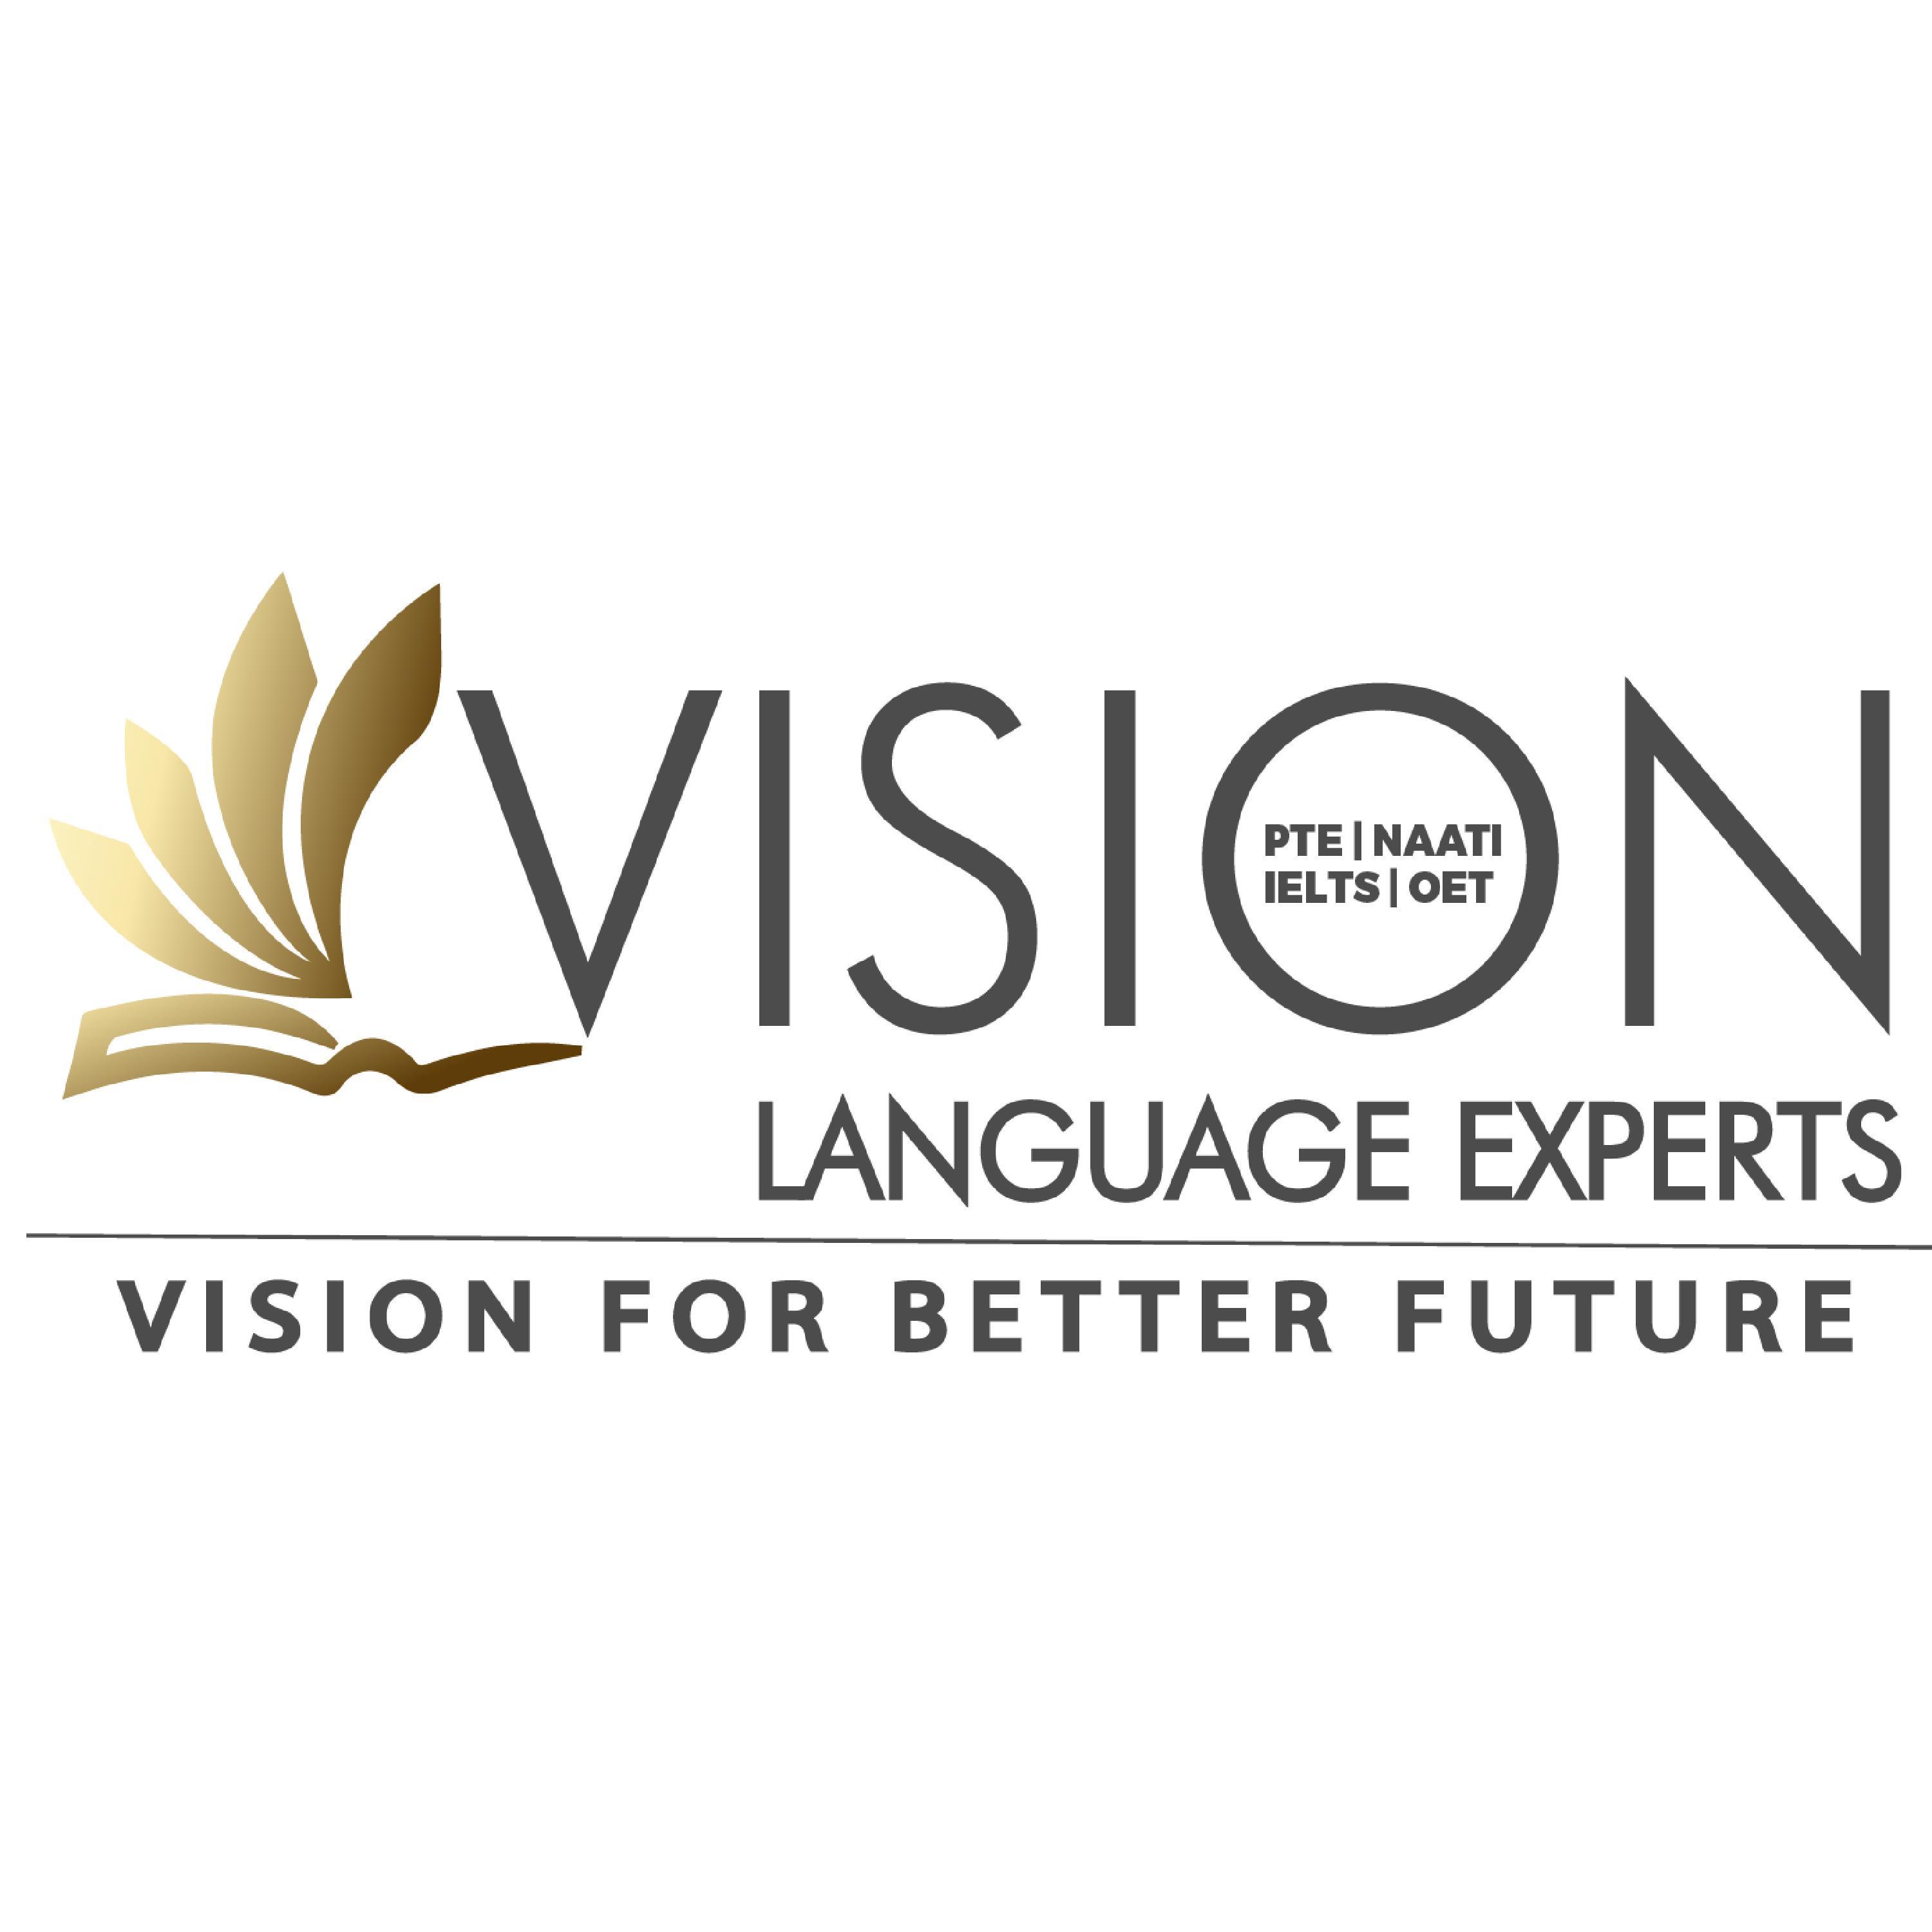 Vision Experts